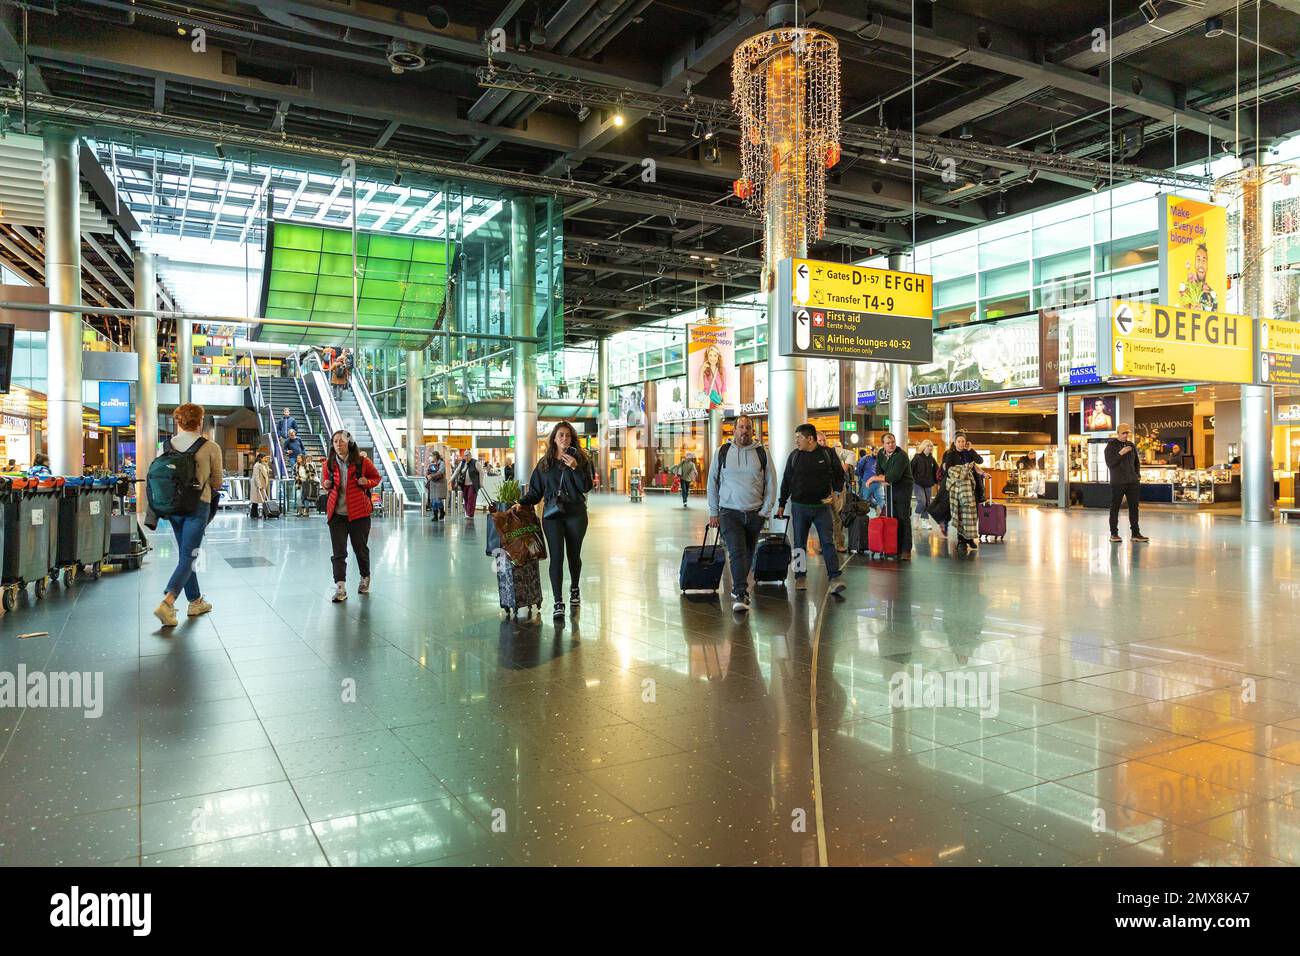 Interiors of the Amsterdam Airport Schiphol, Netherlands. Inside duty free. Airport life. Stock Photo